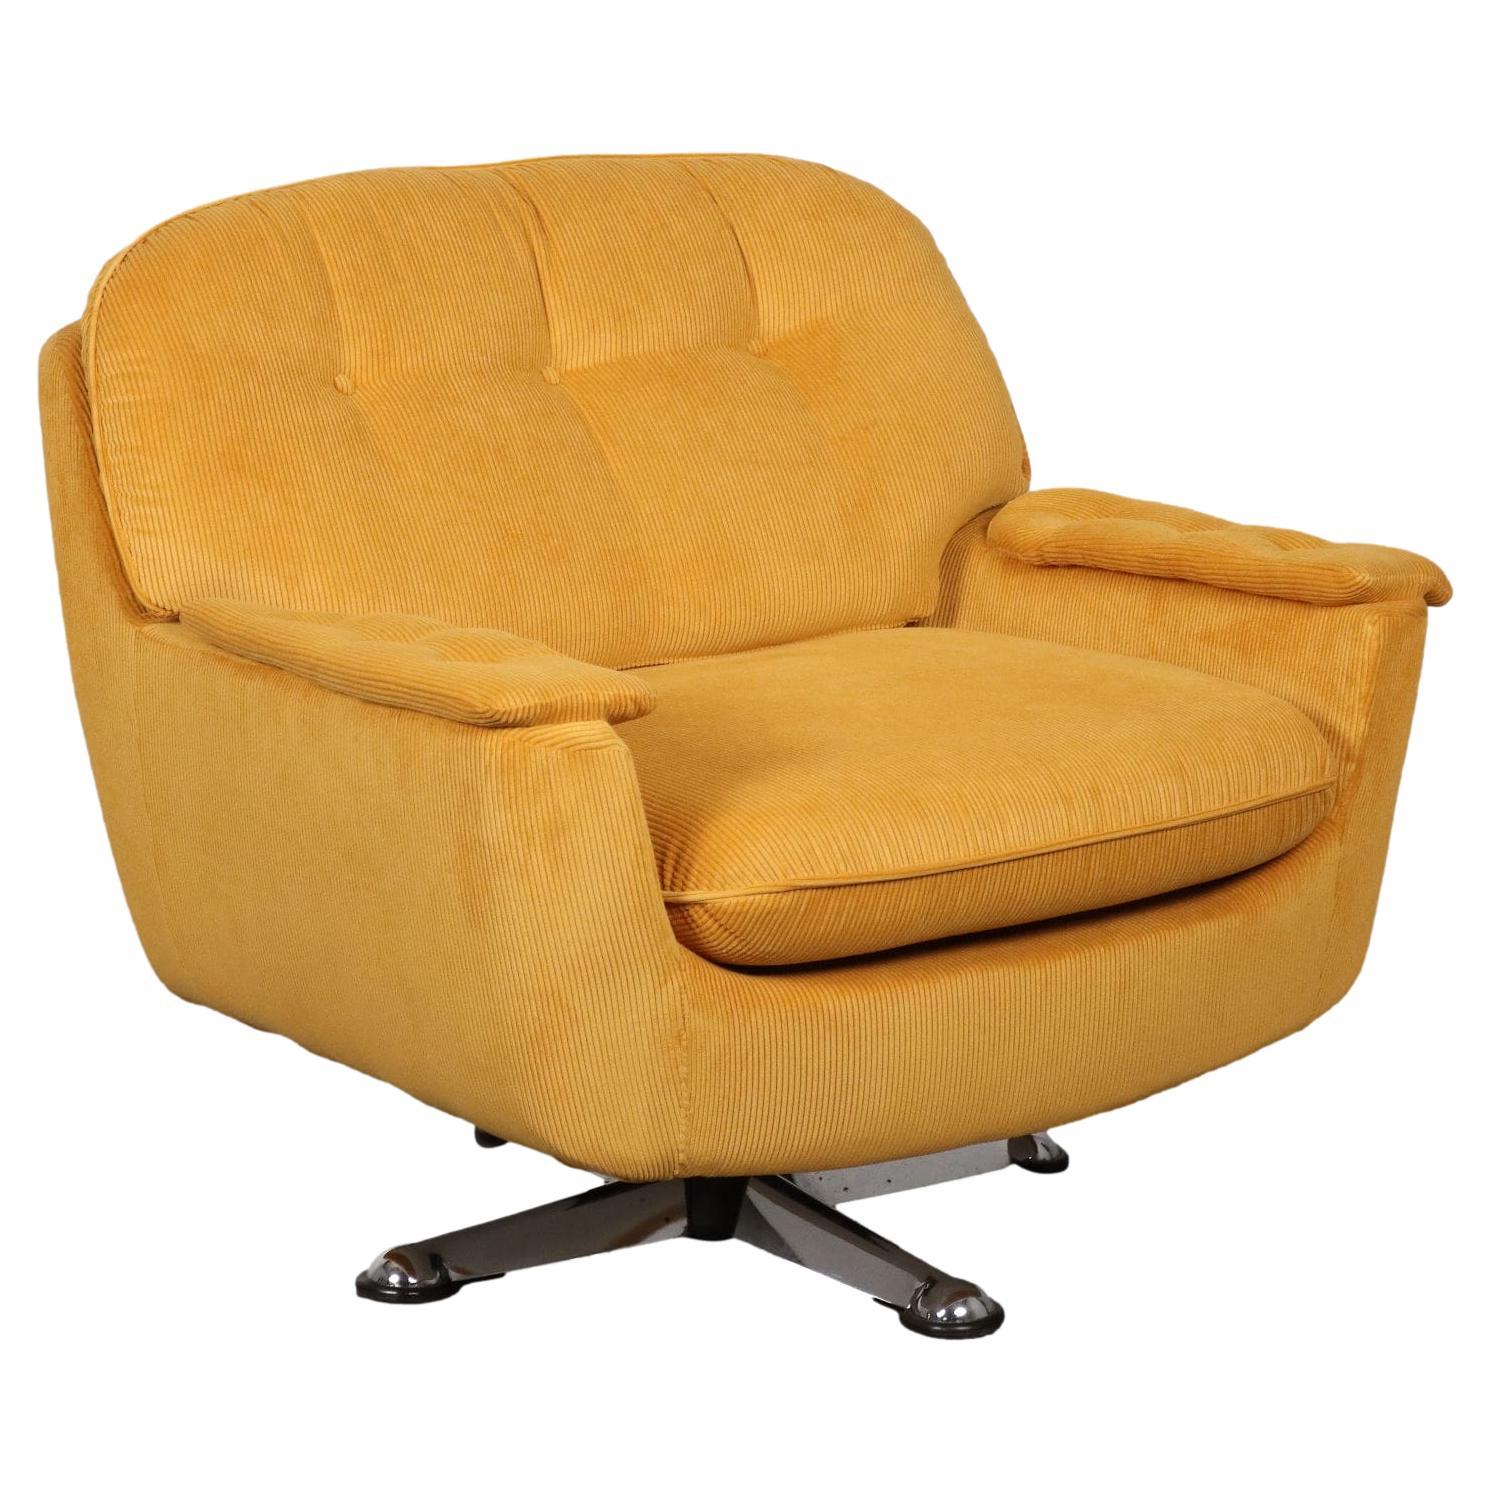 1970s yellow corduroy armchair, restored For Sale